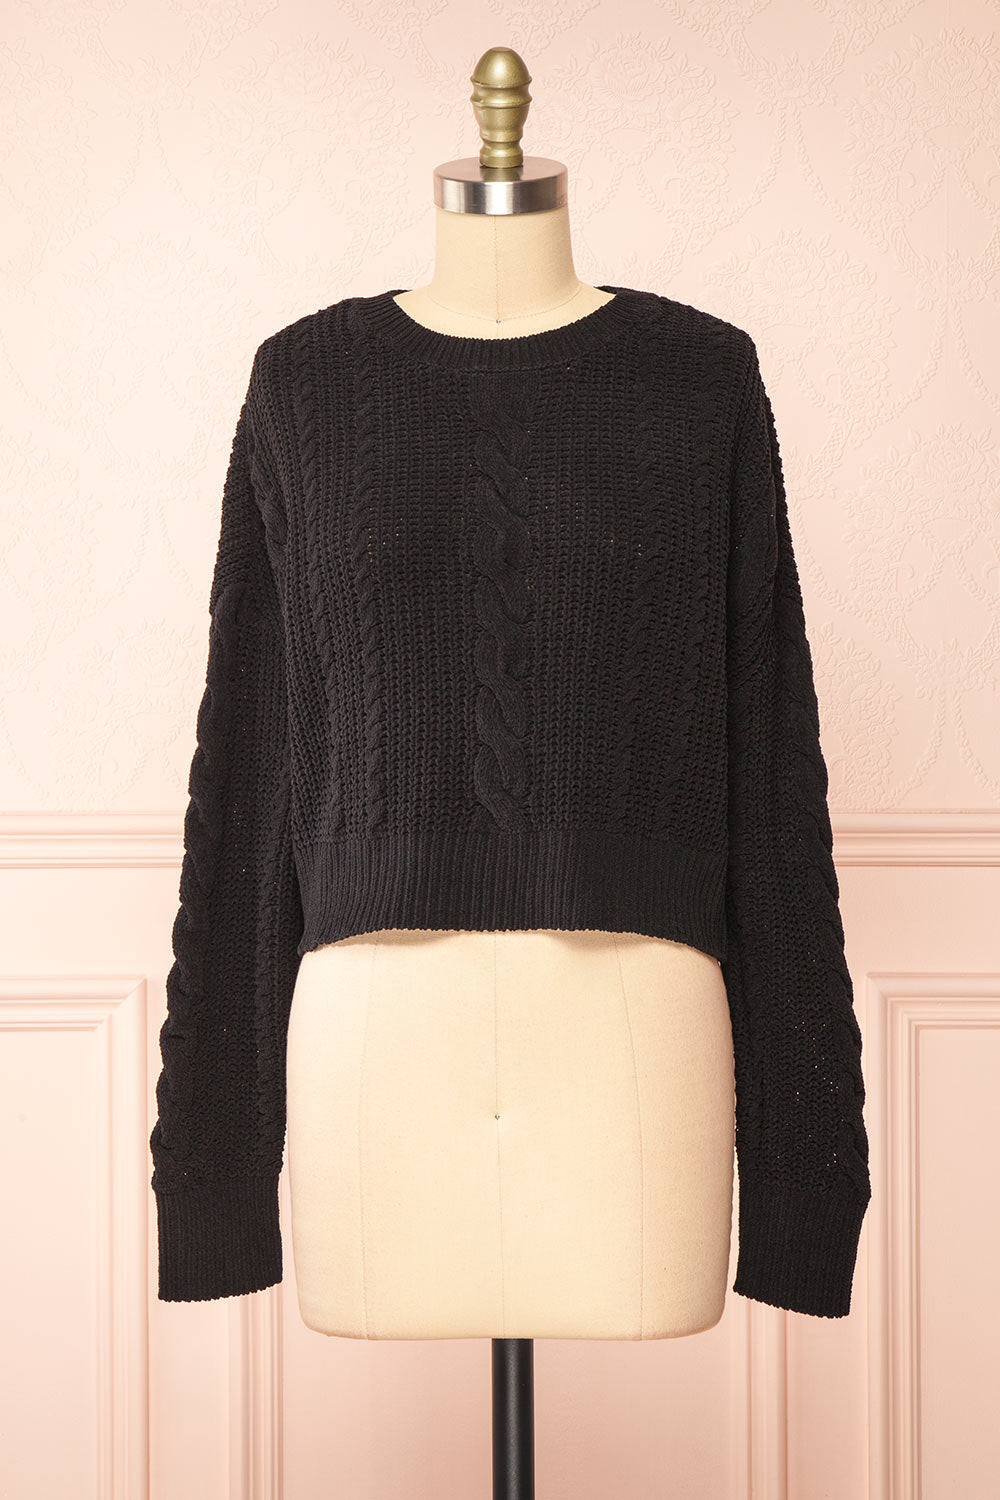 Madeleine Black Cropped Cable Knit Sweater | Boutique 1861 front view